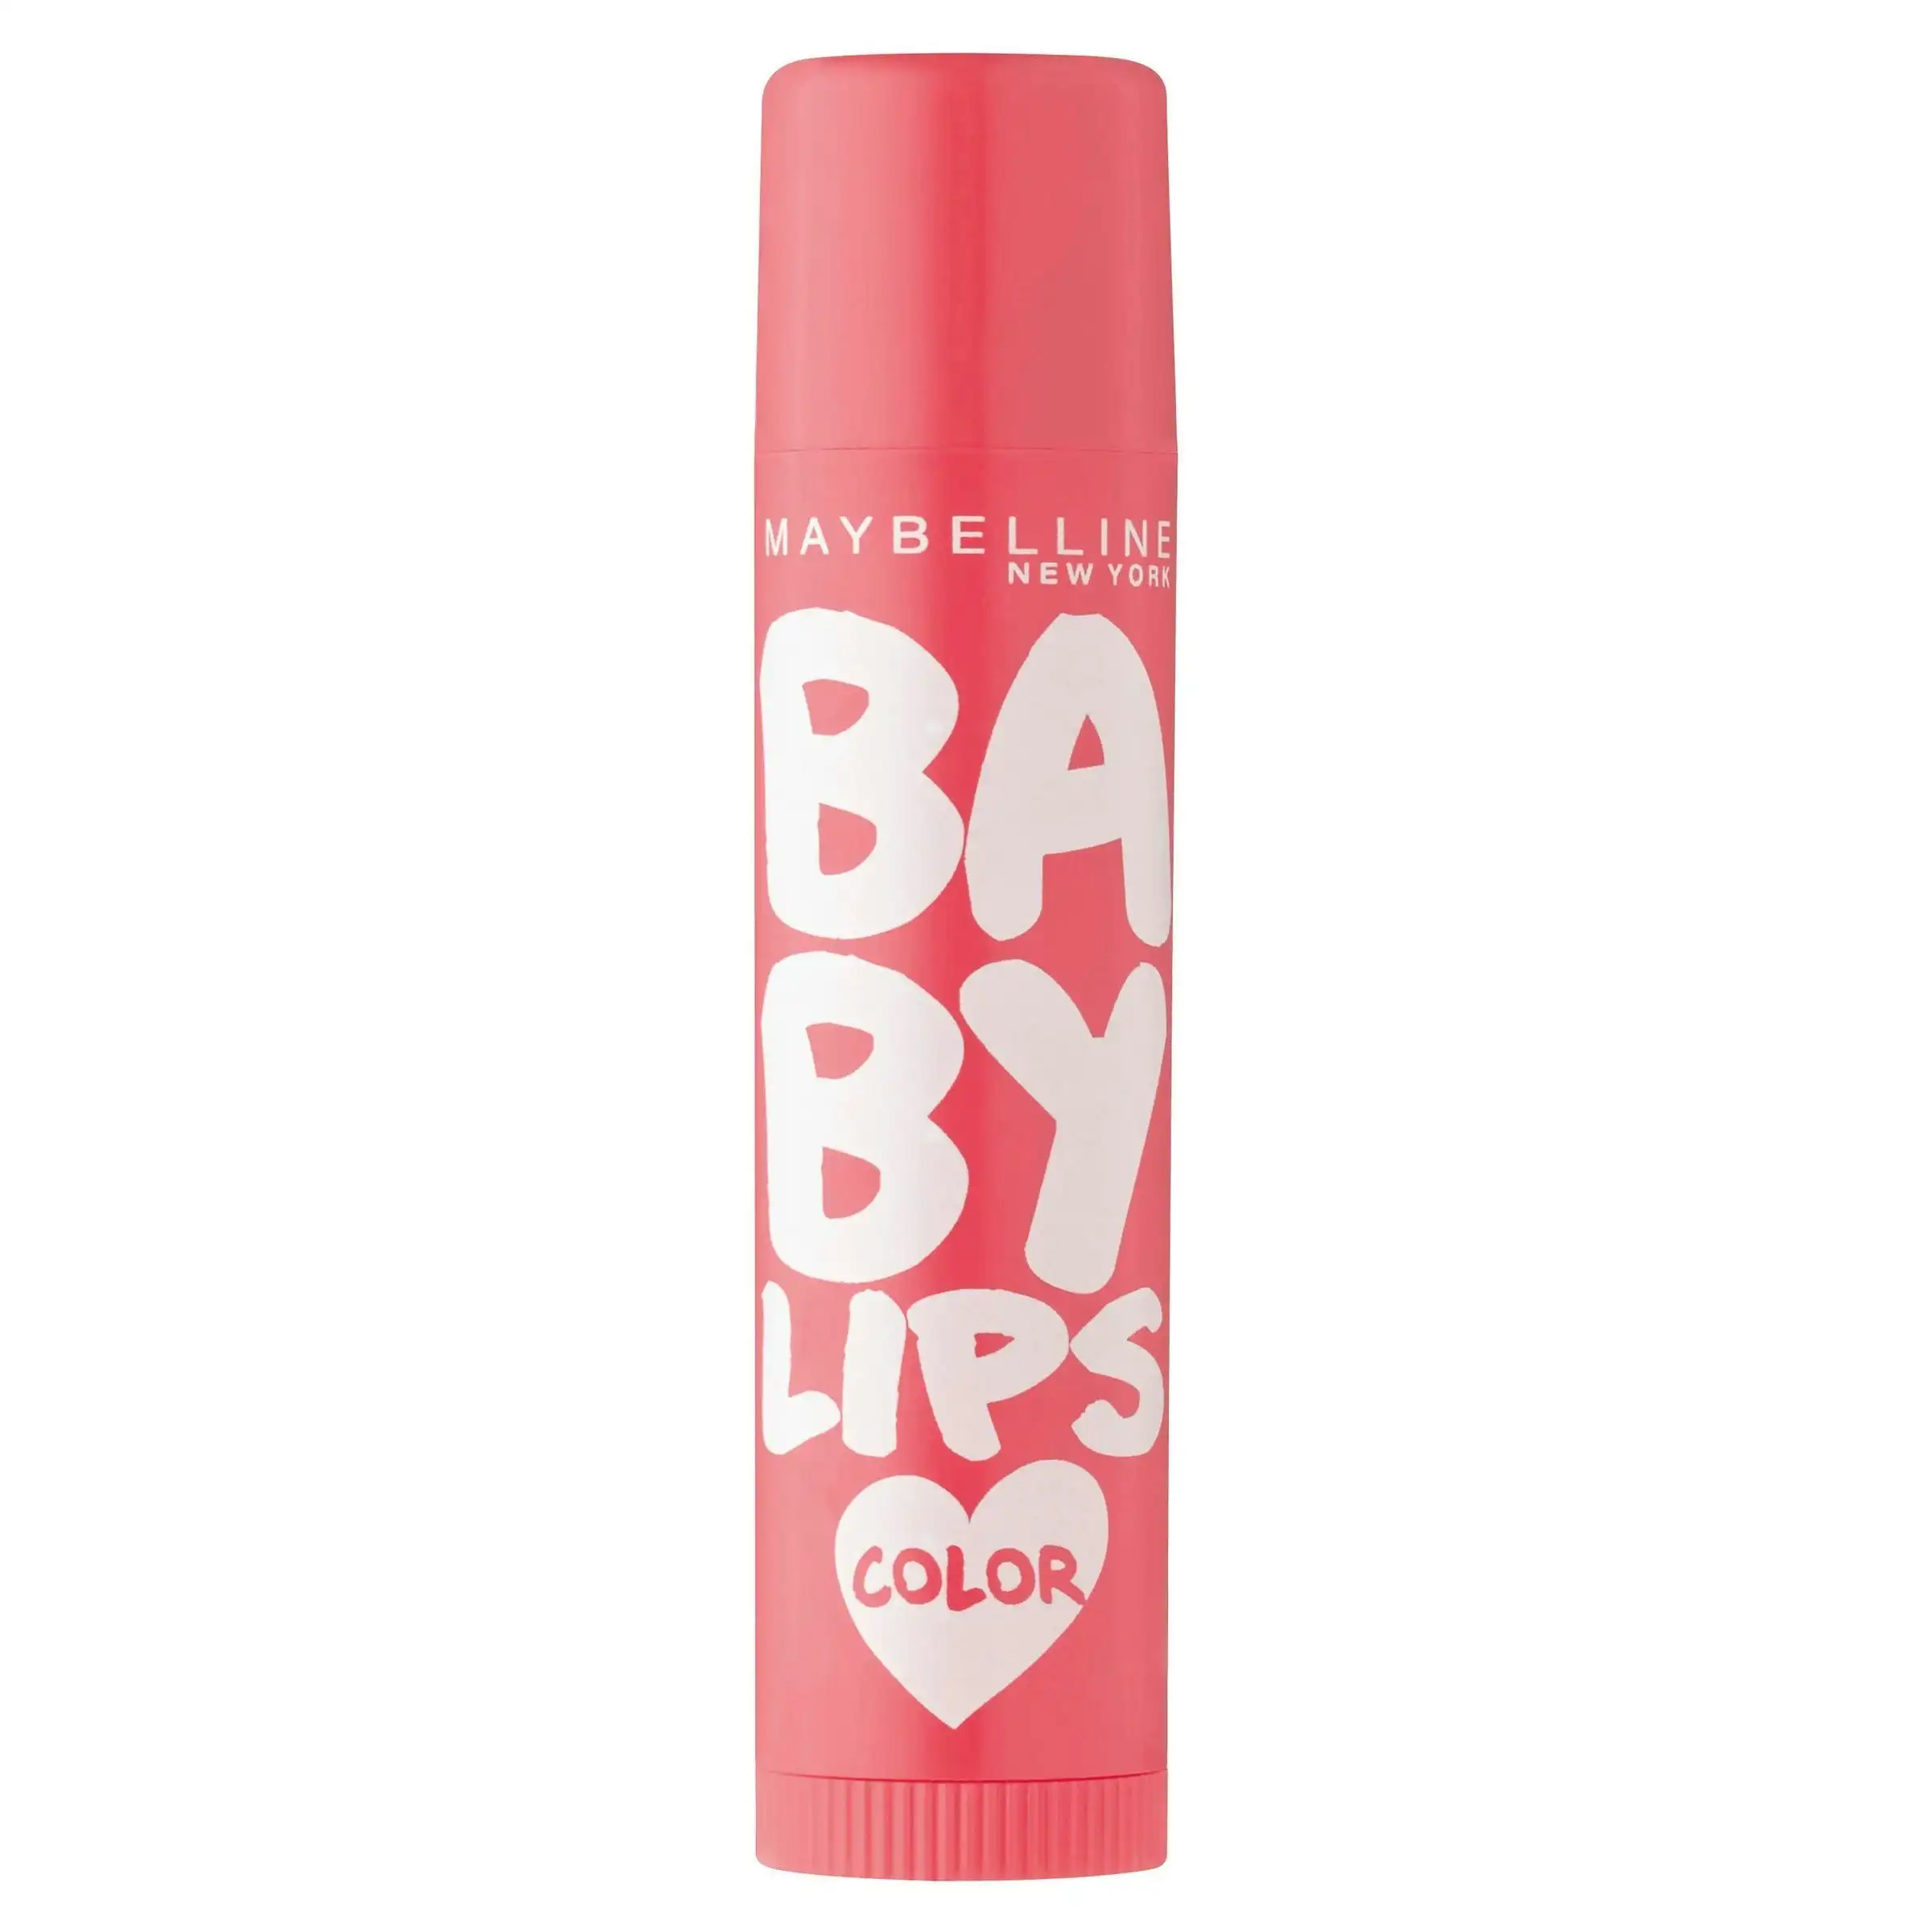 Maybelline Baby Lips Loves Color Lip Balm - Cherry Kiss